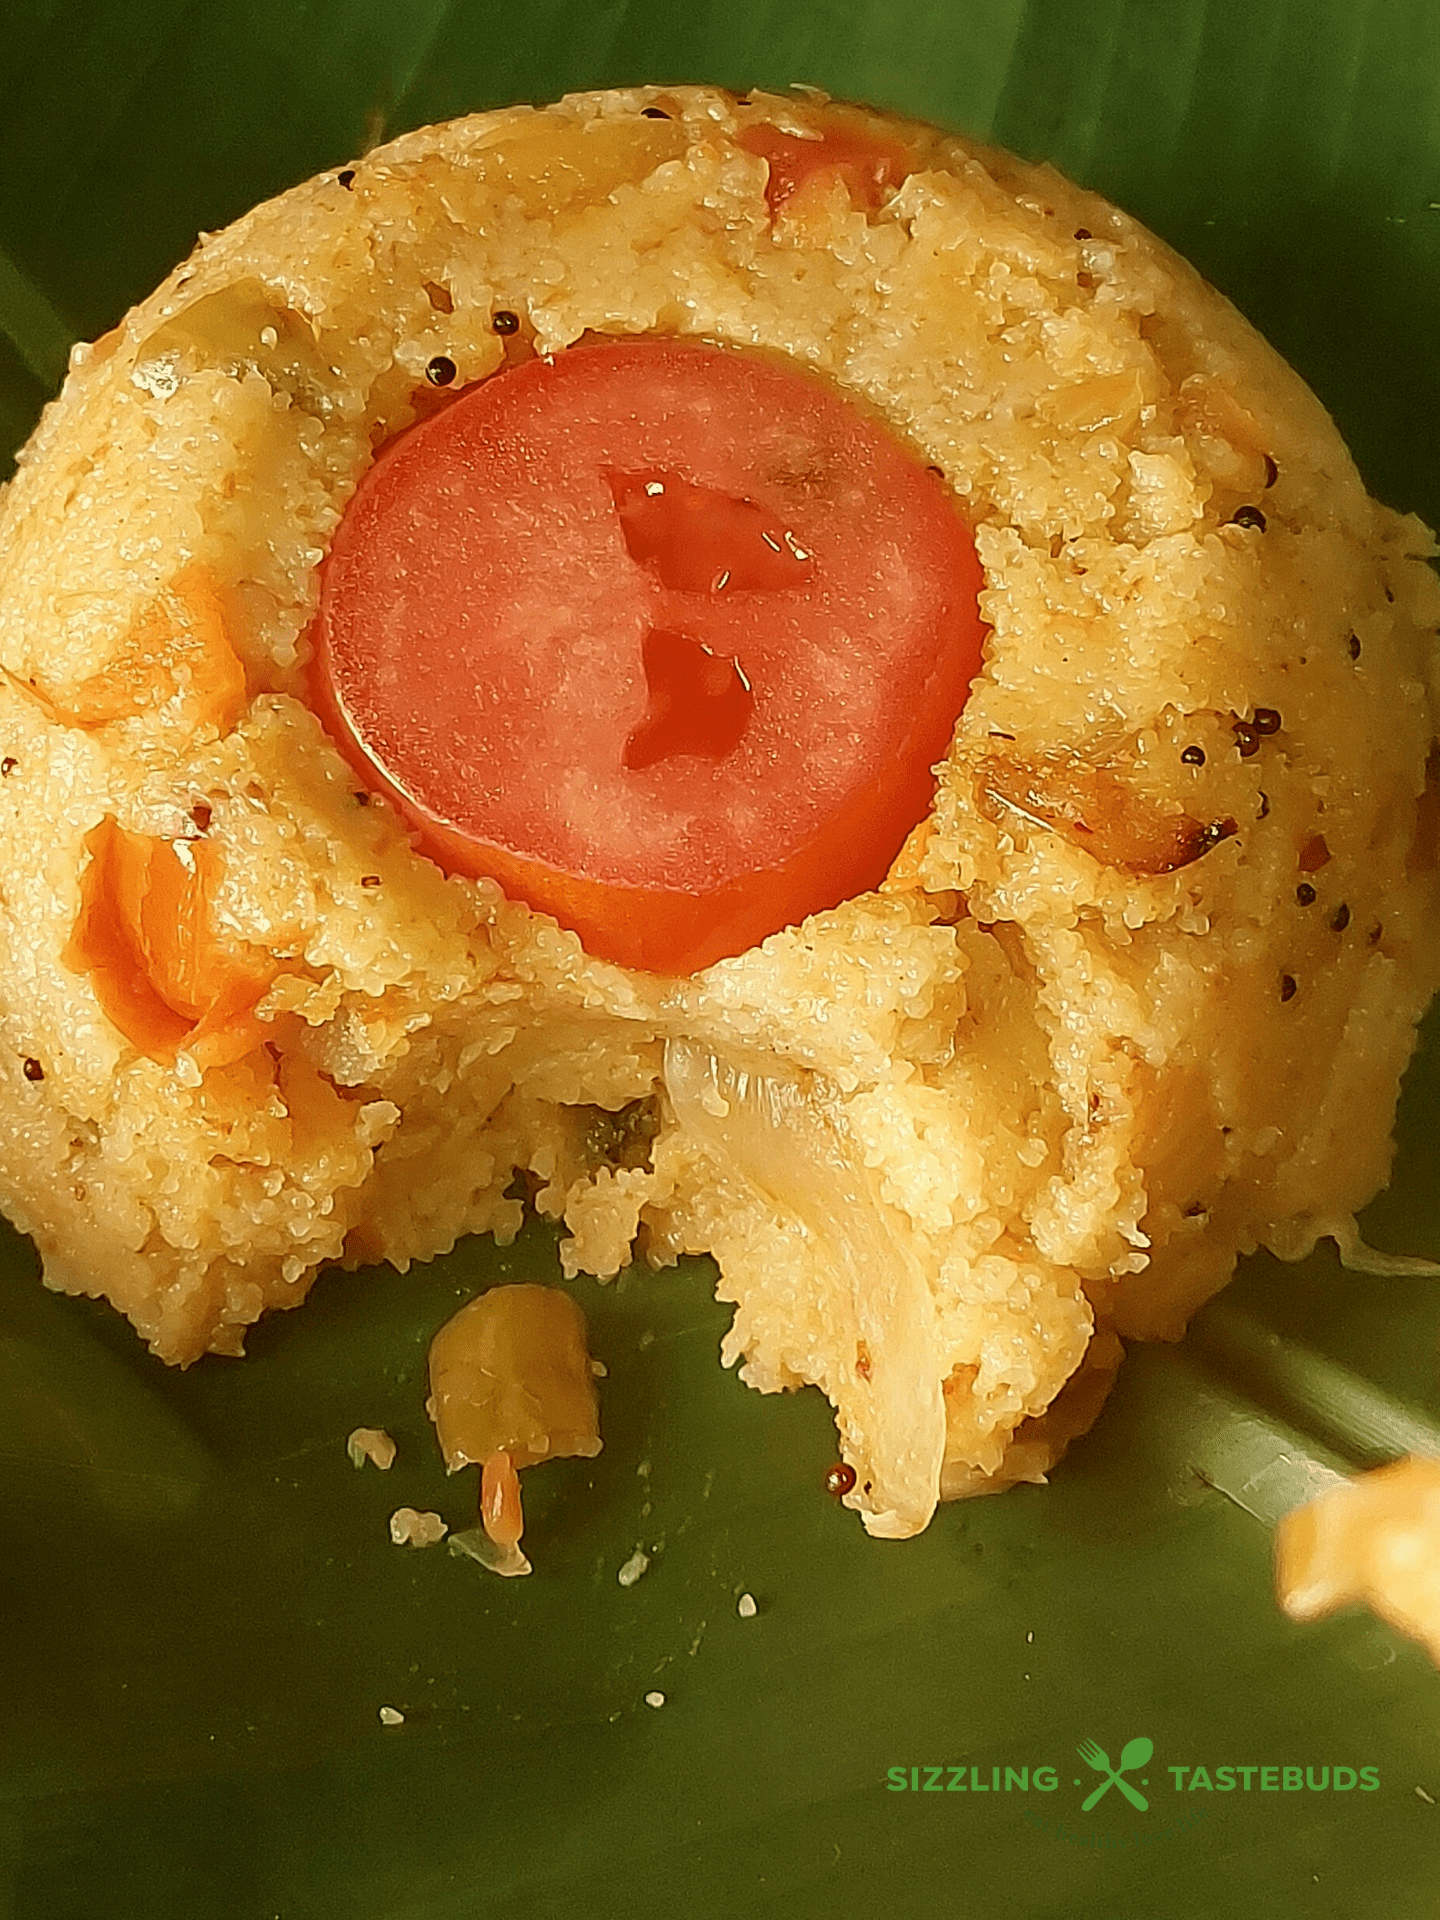 Rava Vangibhath is a speciality from Karnataka. It is an aromatic, melt-in-the mouth savory pudding with semolina, veggies and spices